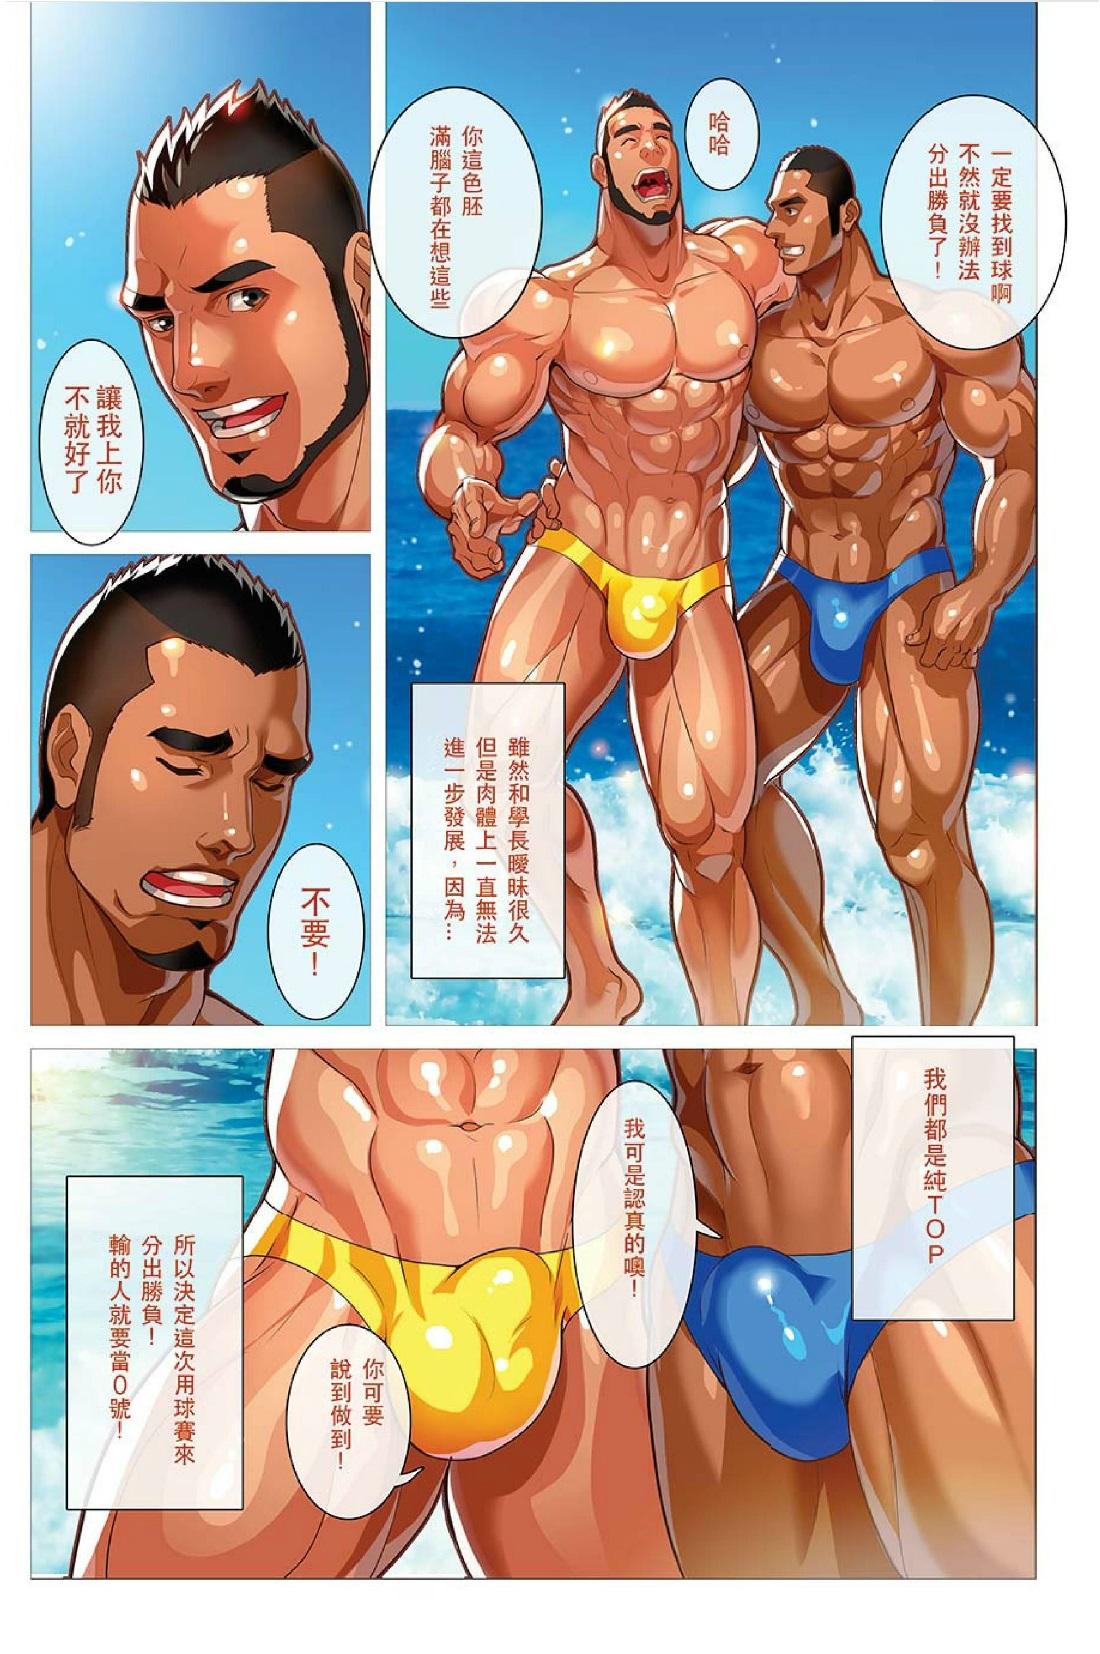 Red 夏日男子筋肉潛艇堡 (Summer's end Muscle Heat - The Boys Of Summer 2015) by 大雄 (Da Sexy Xiong) + Bonus Prequel [CH] Stepmother - Page 4